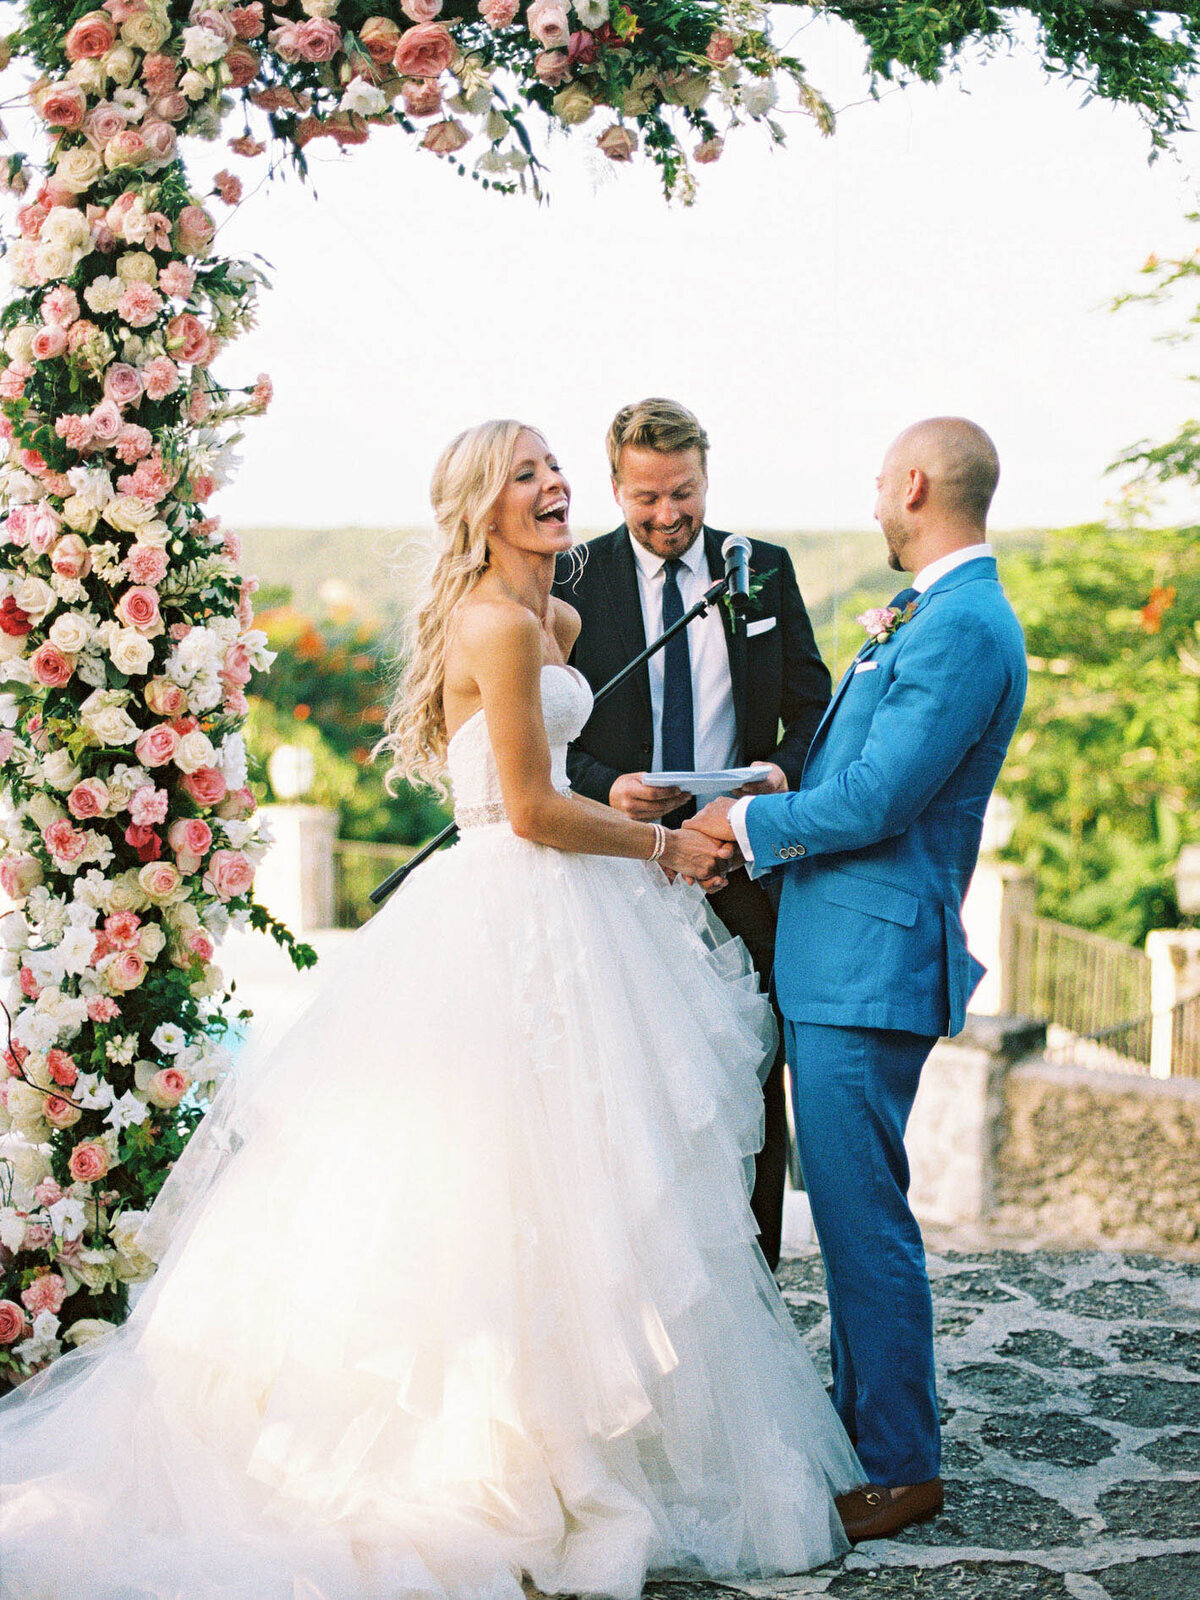 Bride and groom exchanging vows at their outdoor destination wedding